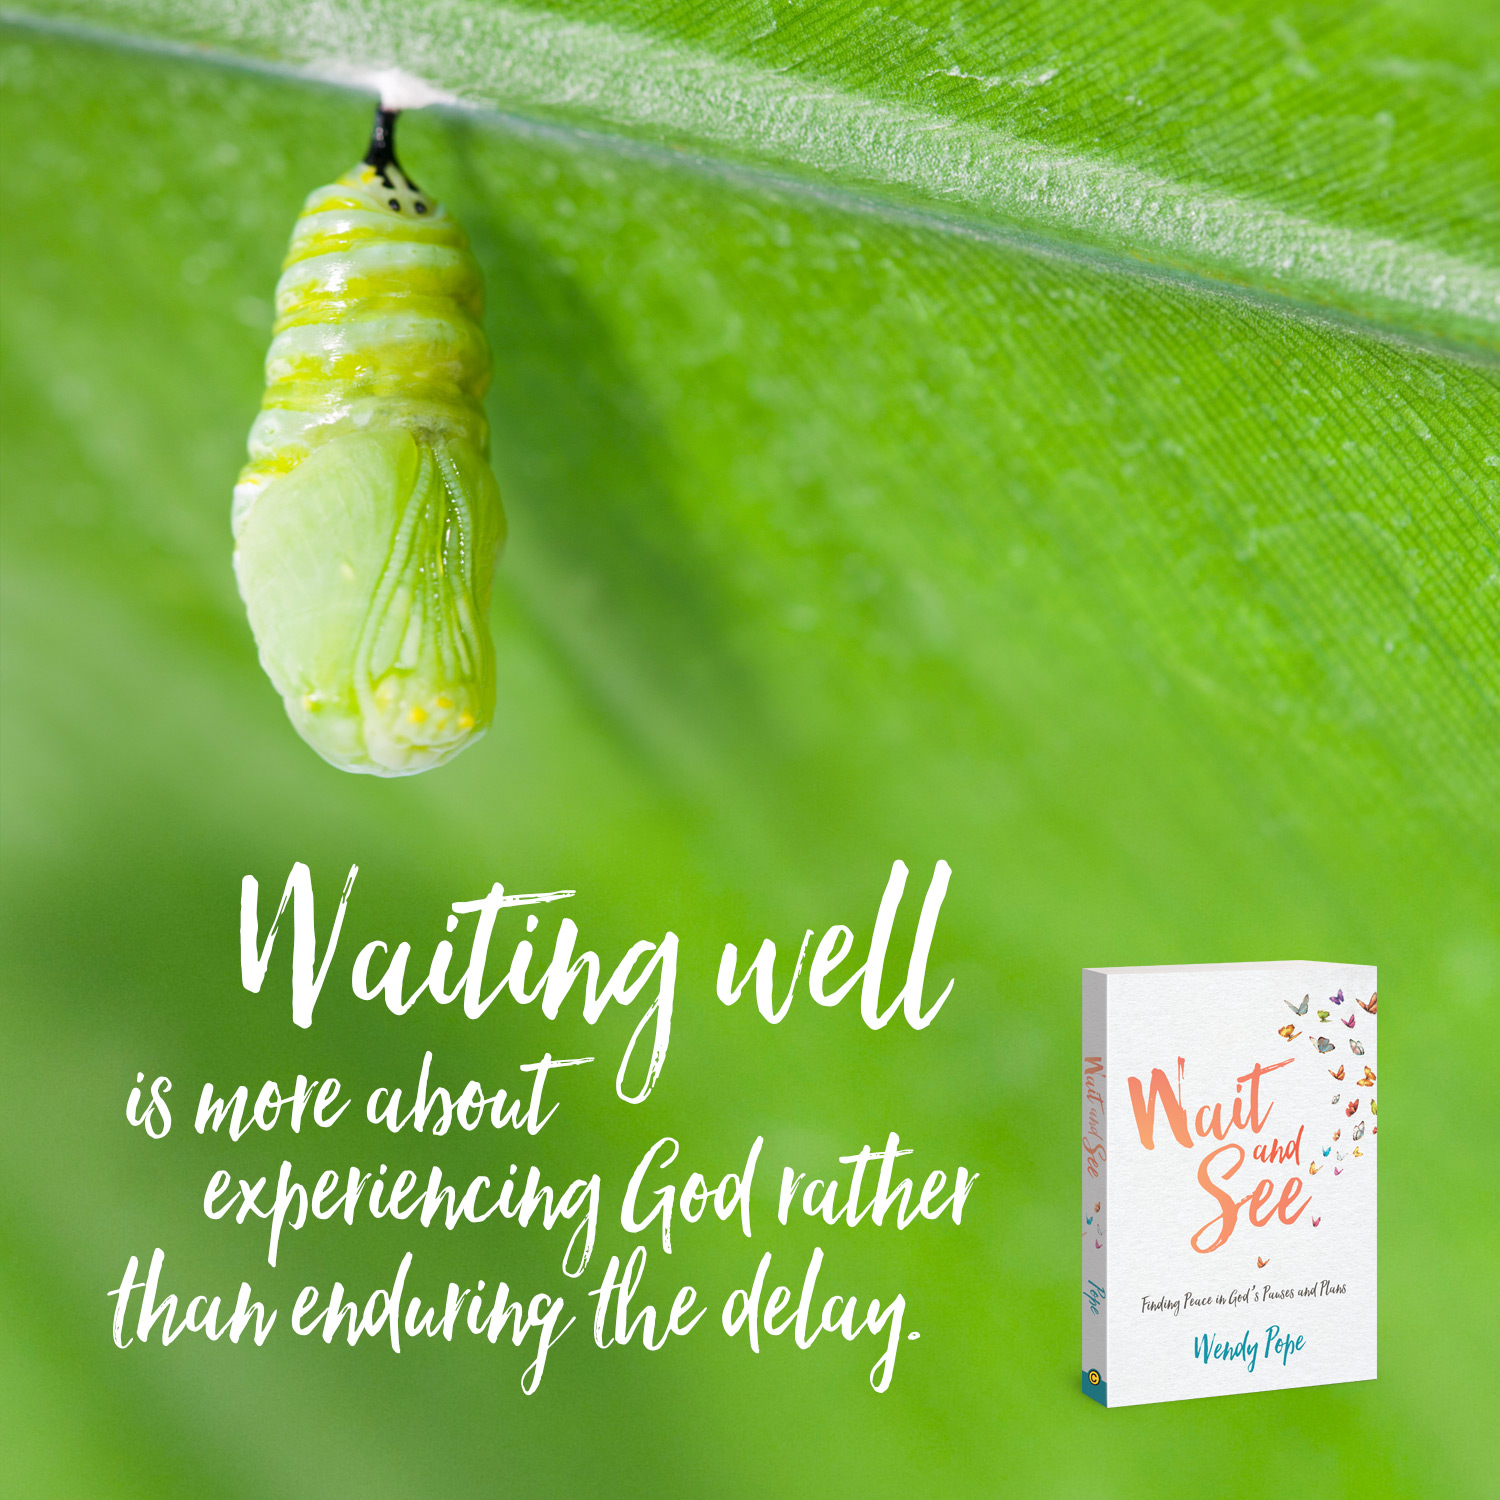 Waiting well is more about experiencing God rather than enduring the delay.